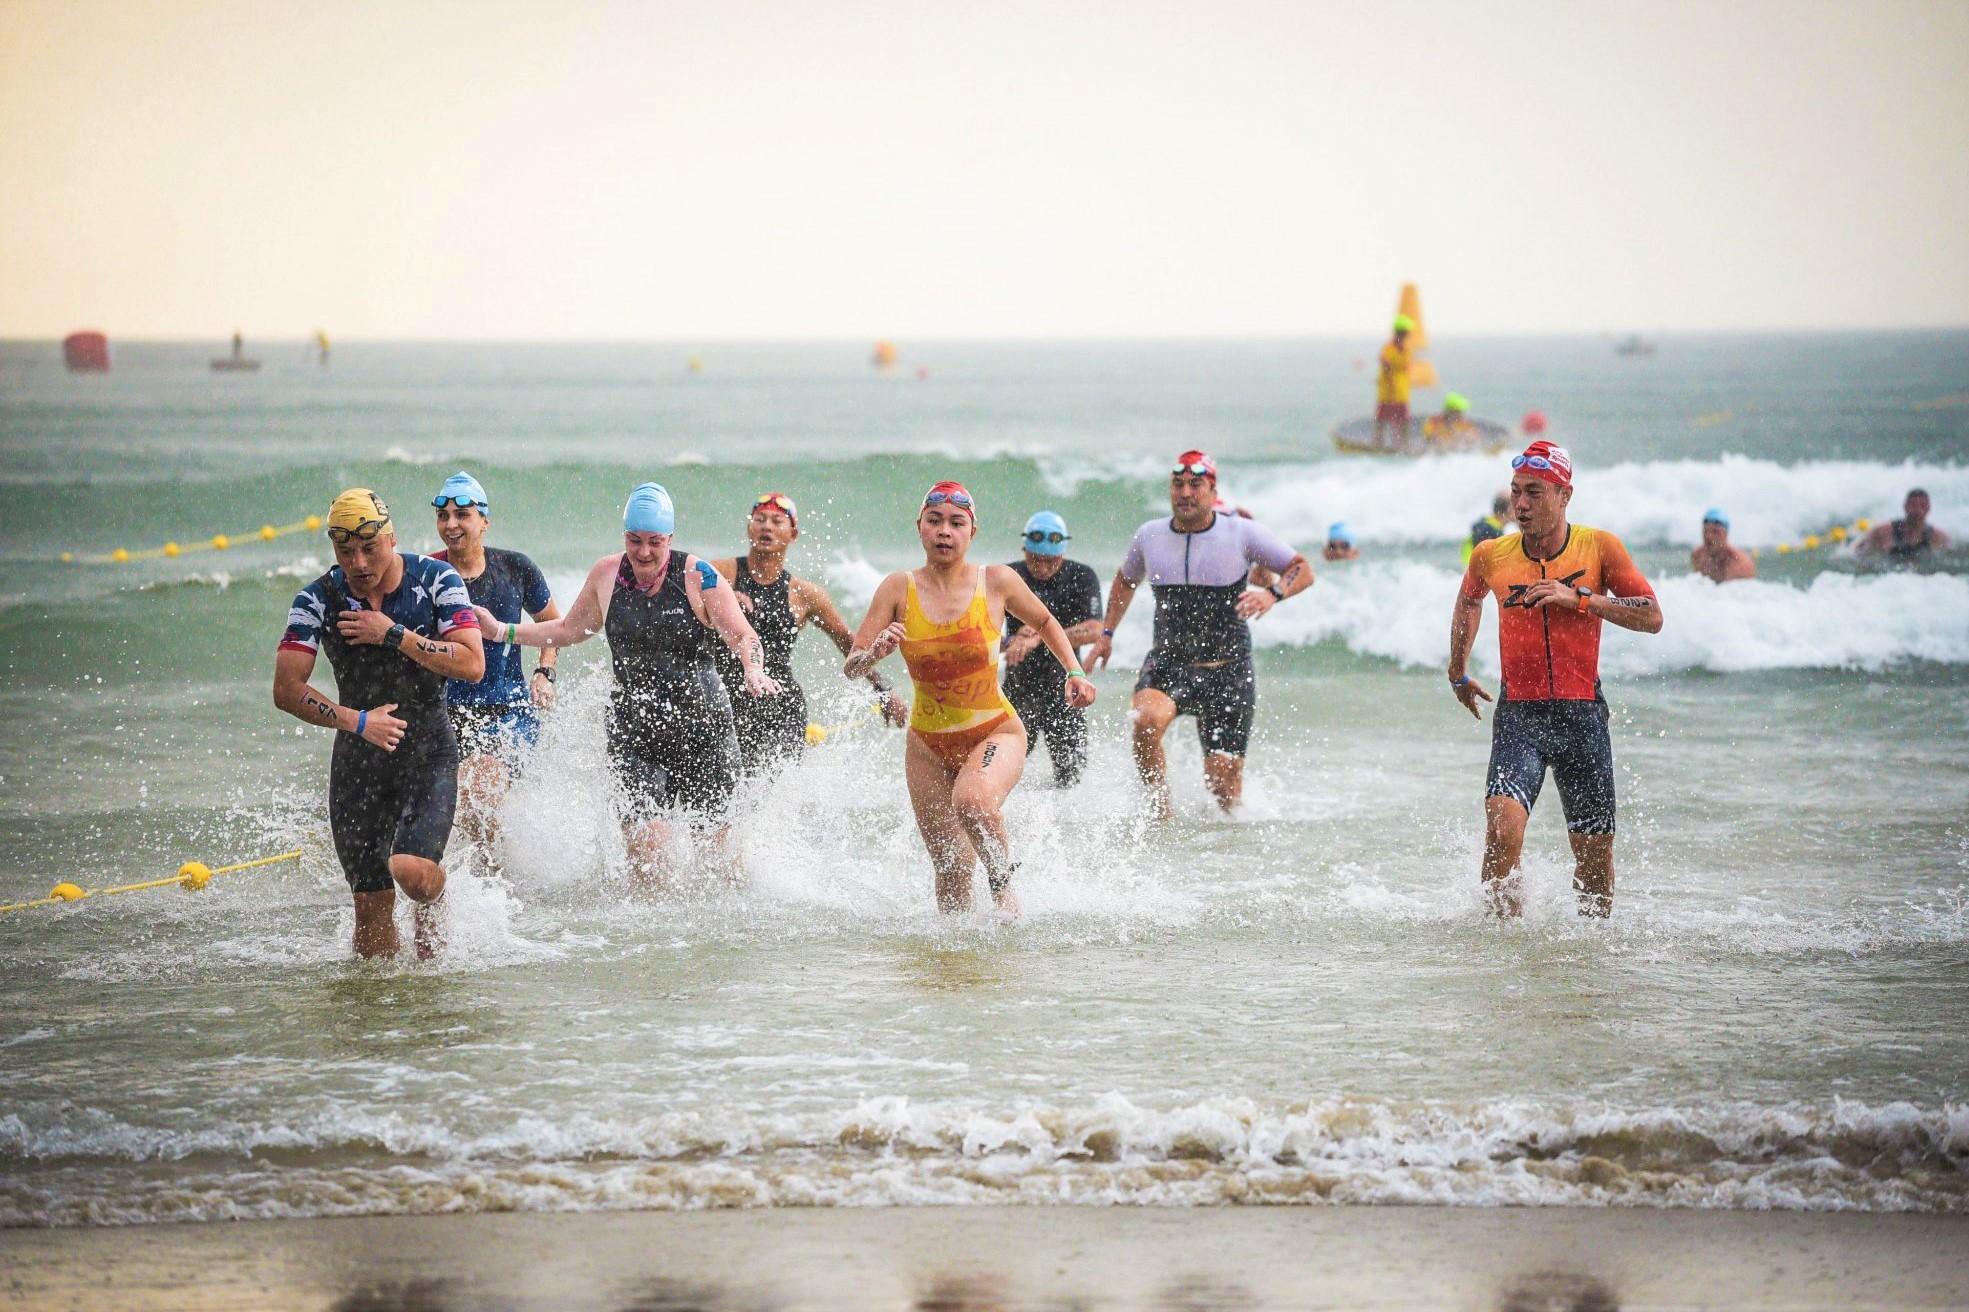 VinFast IRONMAN 70.3 Viet Nam 2023 promises to bring fierce and attractive competitions. Photo: P.N